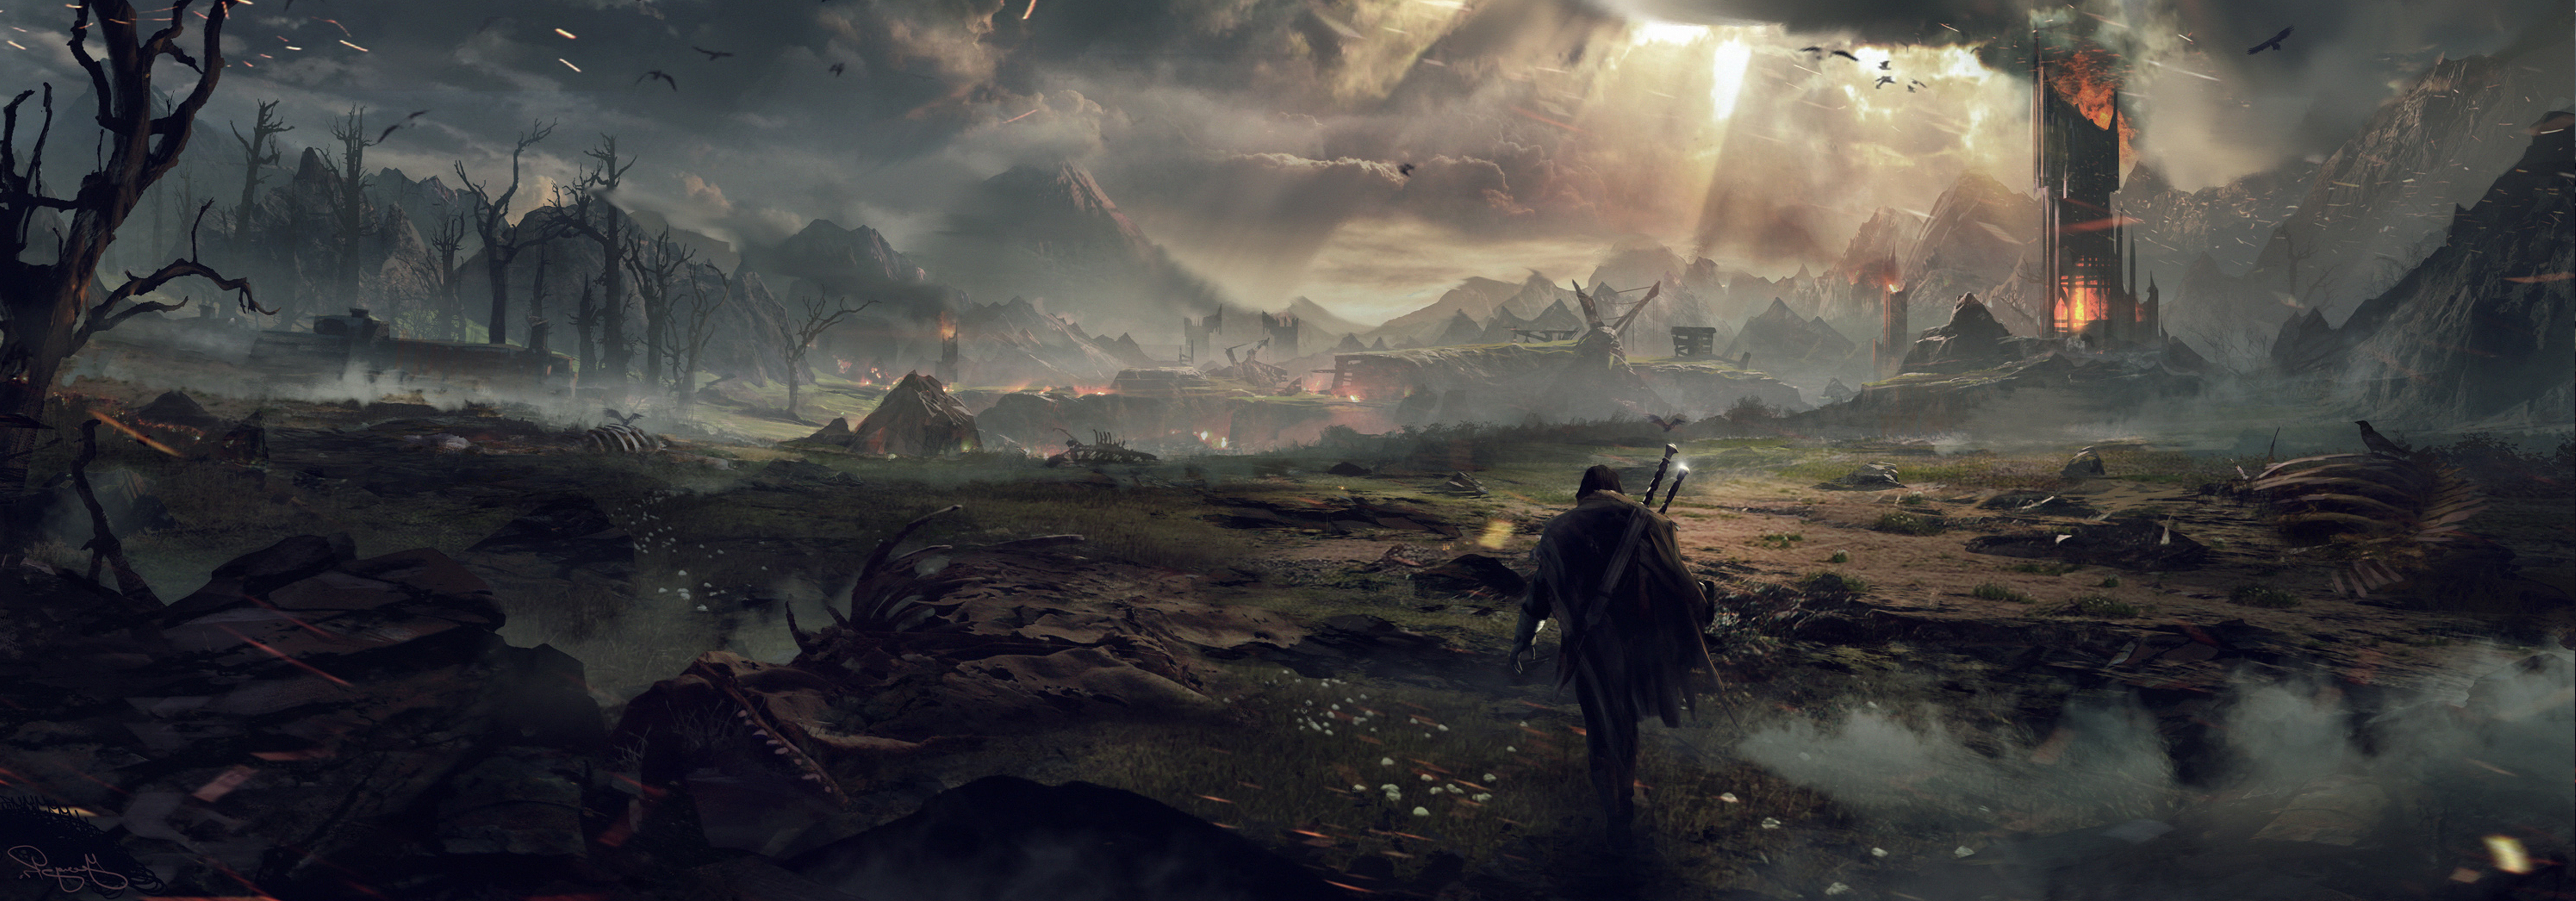 Middle earth: Shadow Of Mordor, Eagle, Video Games, Fire, Skeleton, Sword, Concept Art, The Lord Of The Rings Wallpaper